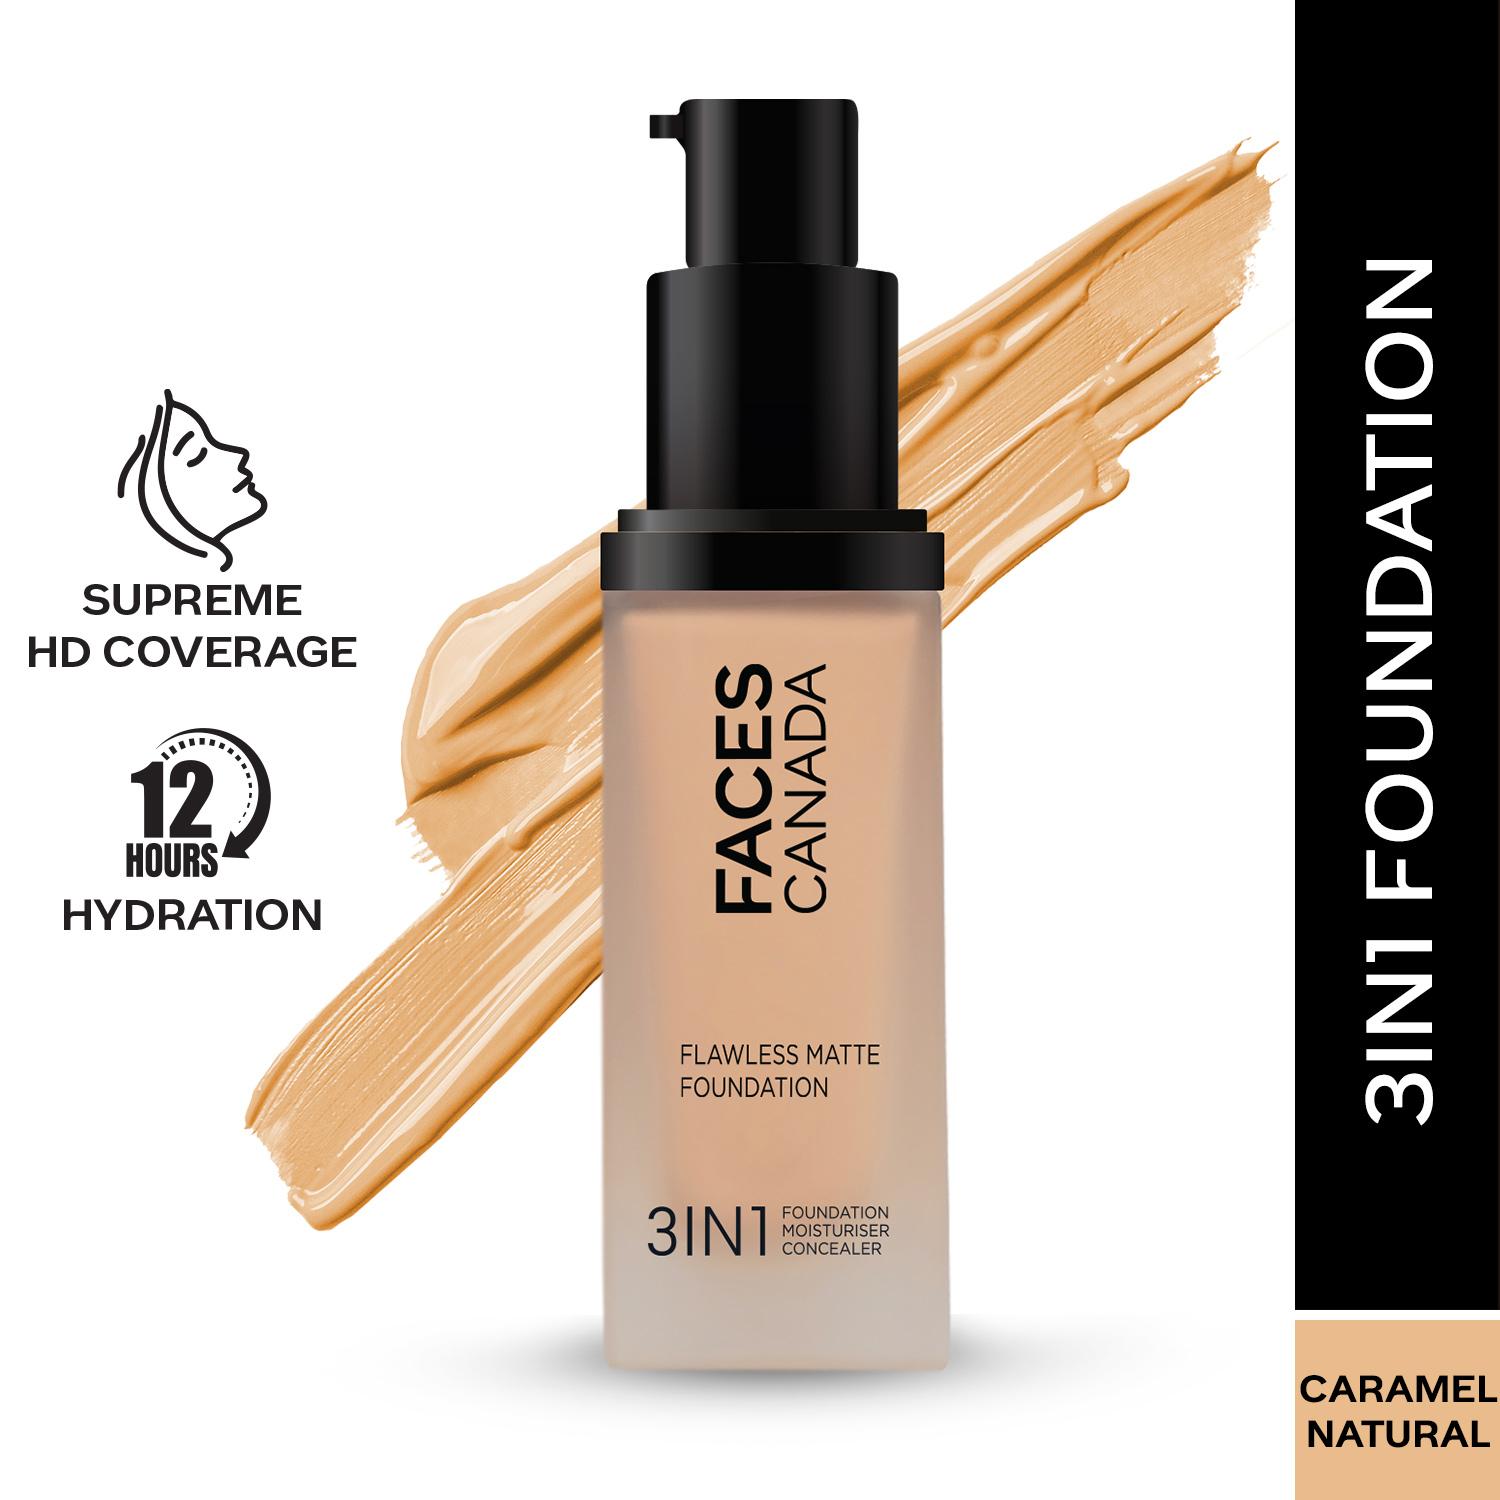 Faces Canada | Faces Canada Flawless Matte Foundation - Caramel Natural 023, 12 HR Hydration + SPF 18 (30 ml)